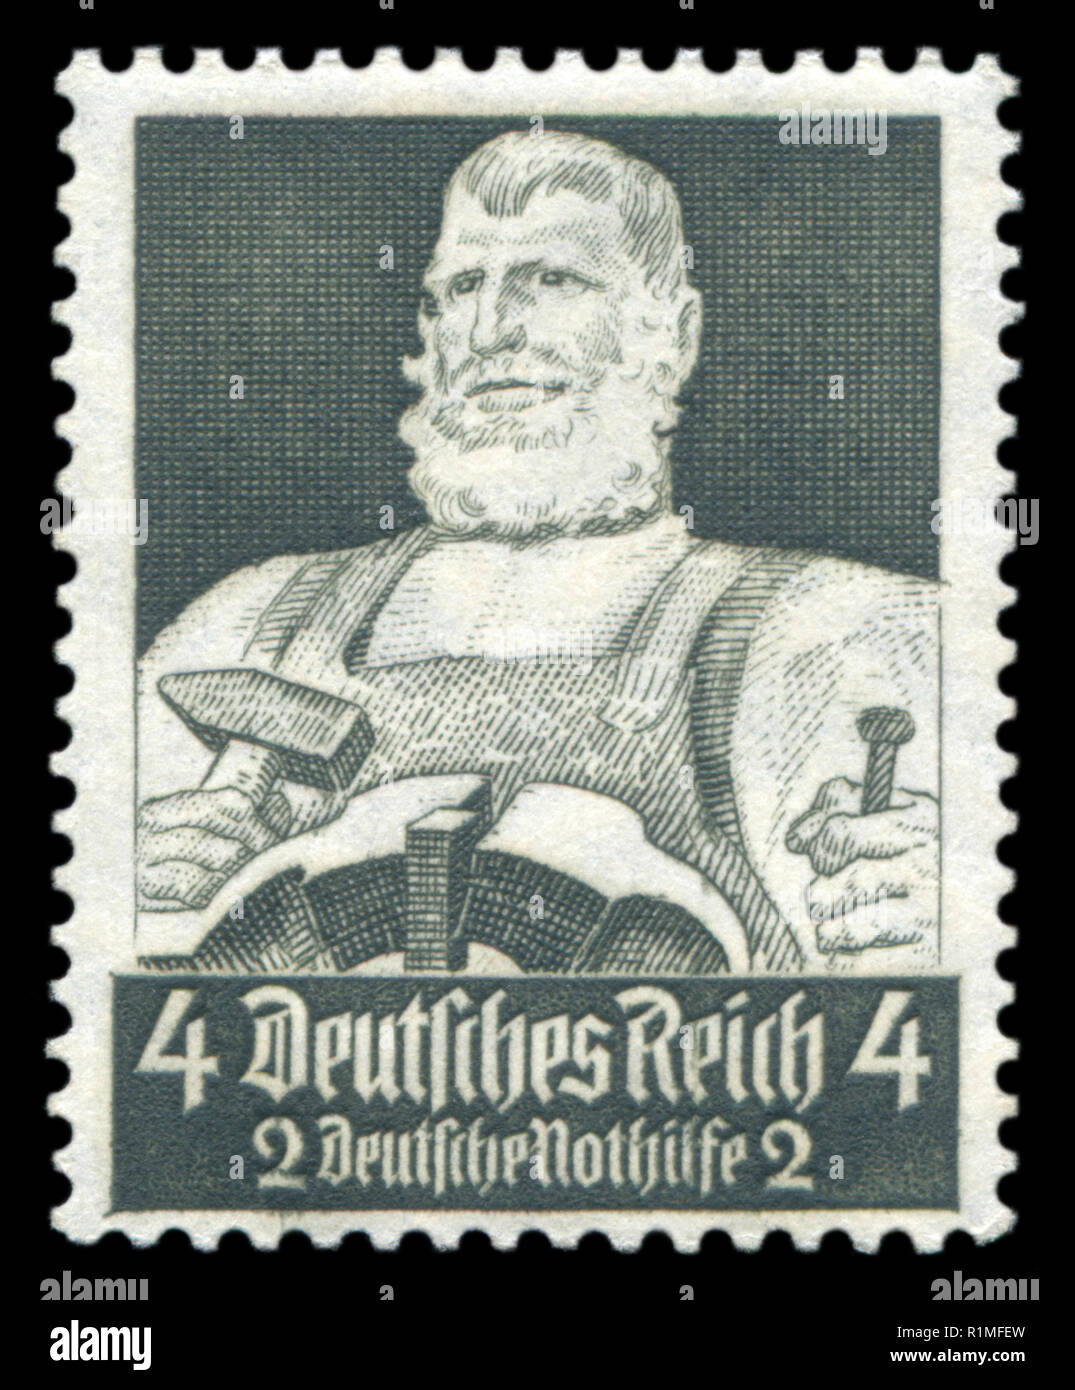 German postage stamp: Blacksmith with hammer and anvil, Emergency assistance Fund. Honourable professions, 1934, Germany, the Third Reich Stock Photo